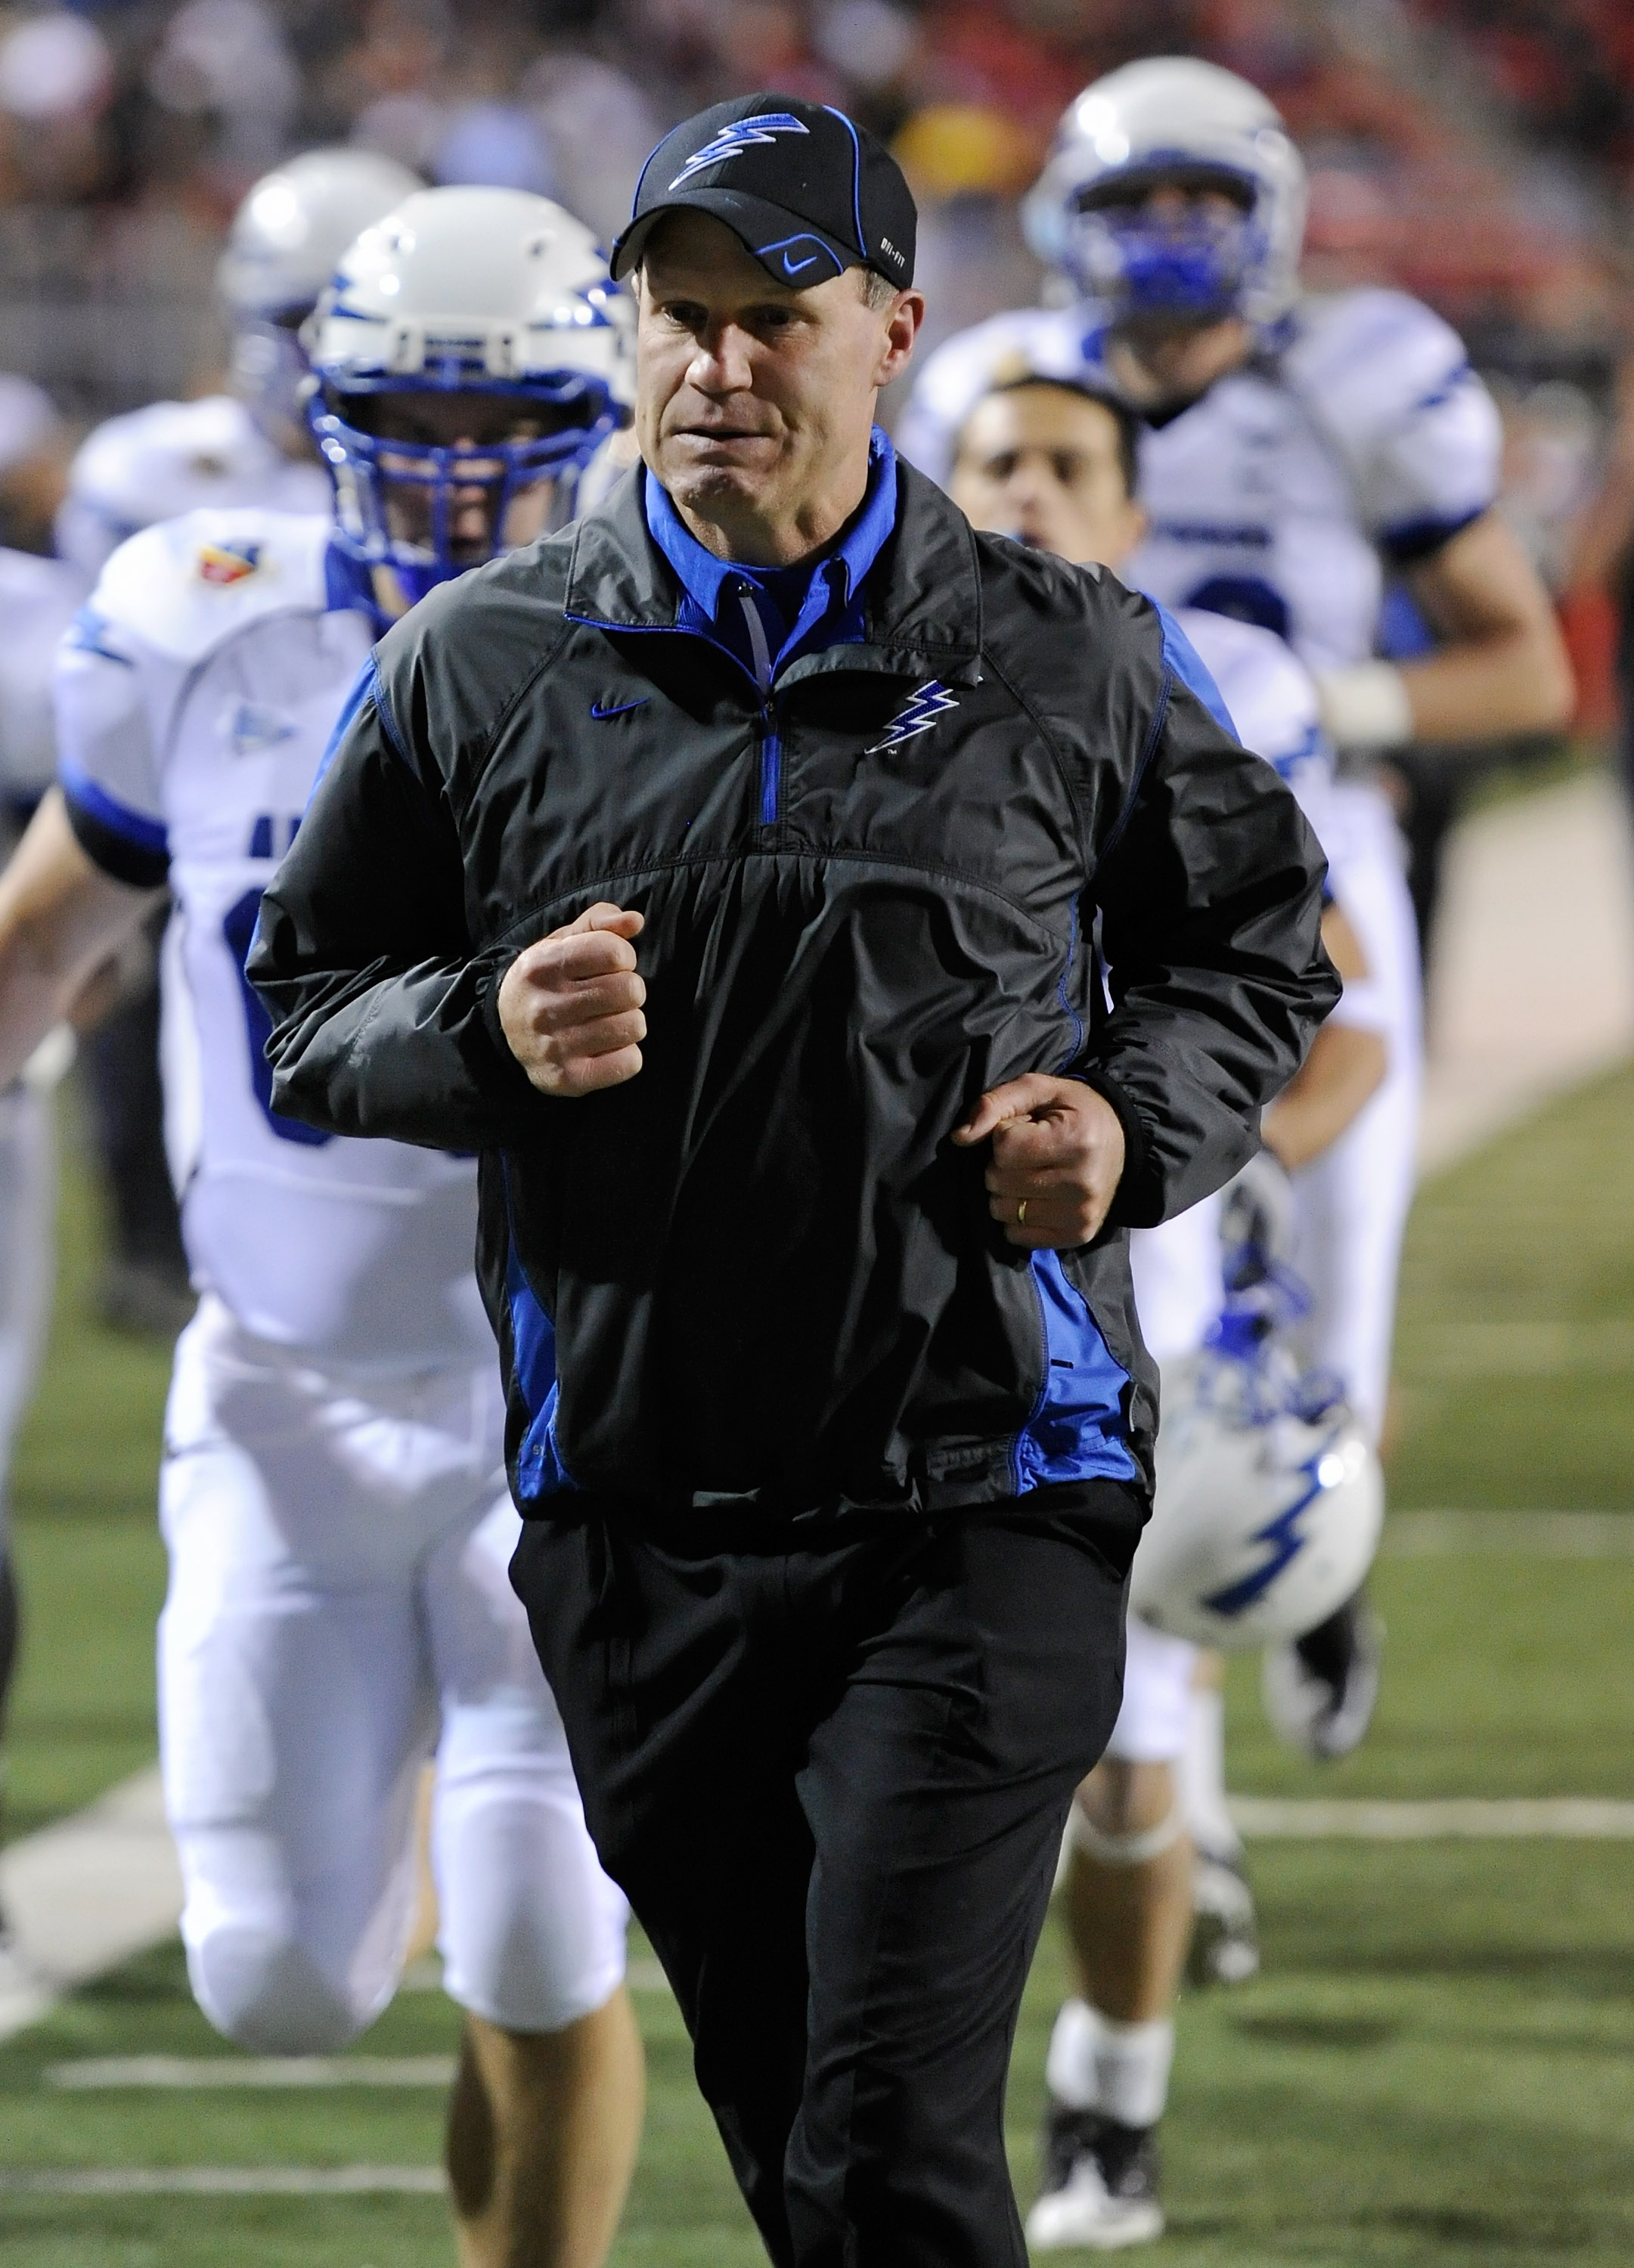 LAS VEGAS - NOVEMBER 18:  Head coach Troy Calhoun of the Air Force Falcons runs off the field at halftime during a game against the UNLV Rebels at Sam Boyd Stadium November 18, 2010 in Las Vegas, Nevada. Air Force won 35-20.  (Photo by Ethan Miller/Getty